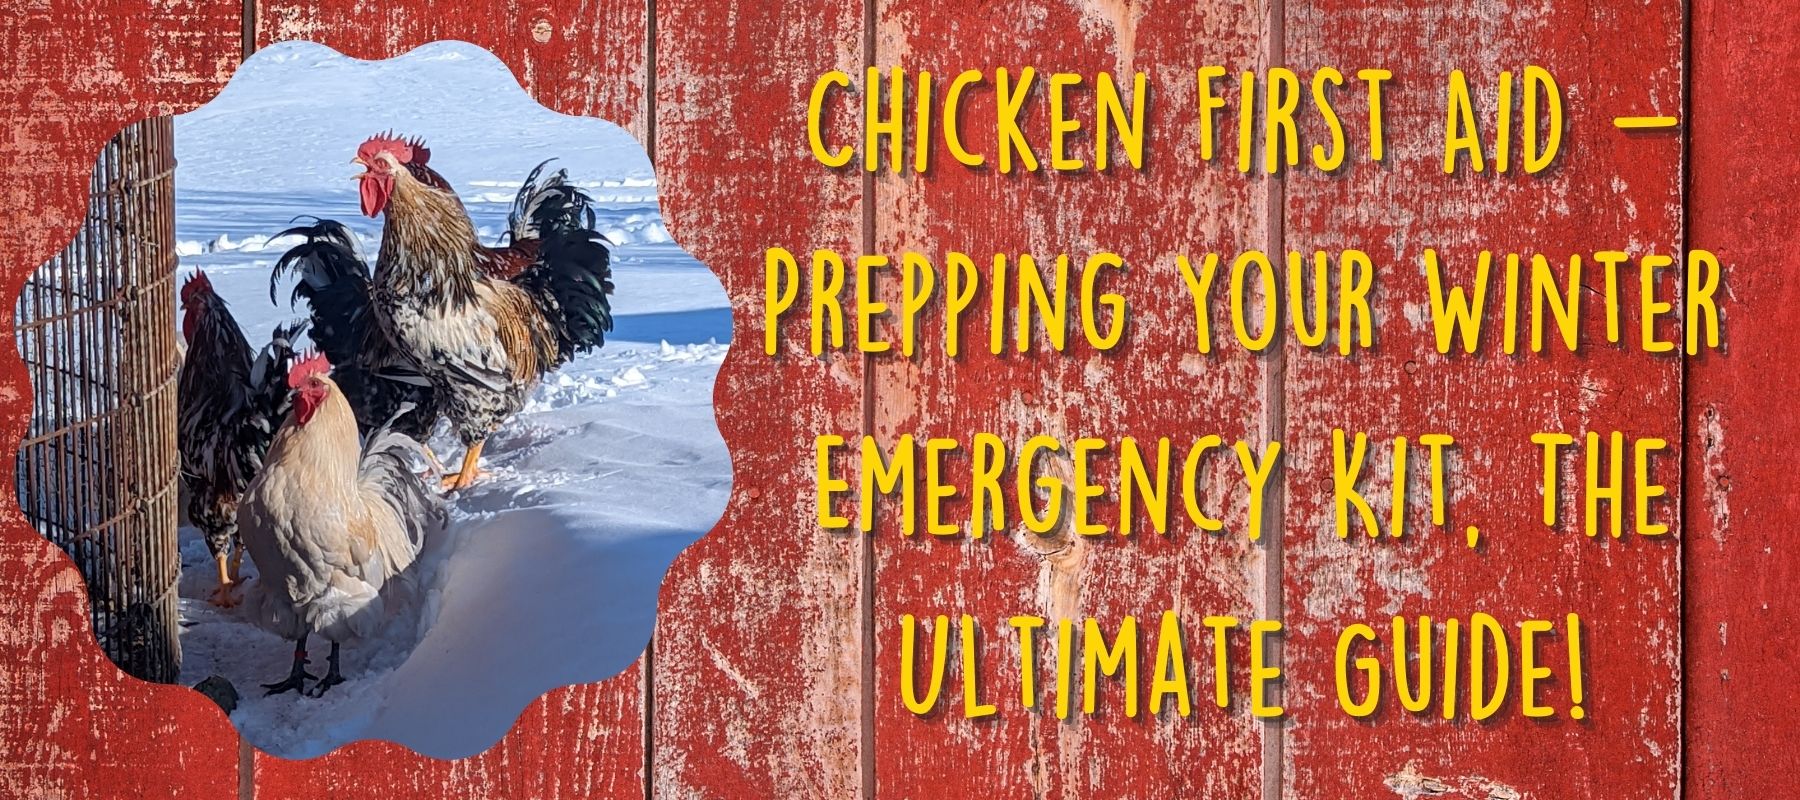 Chicken First Aid - Prepping Your Winter Emergency Kit, The Ultimate Guide!